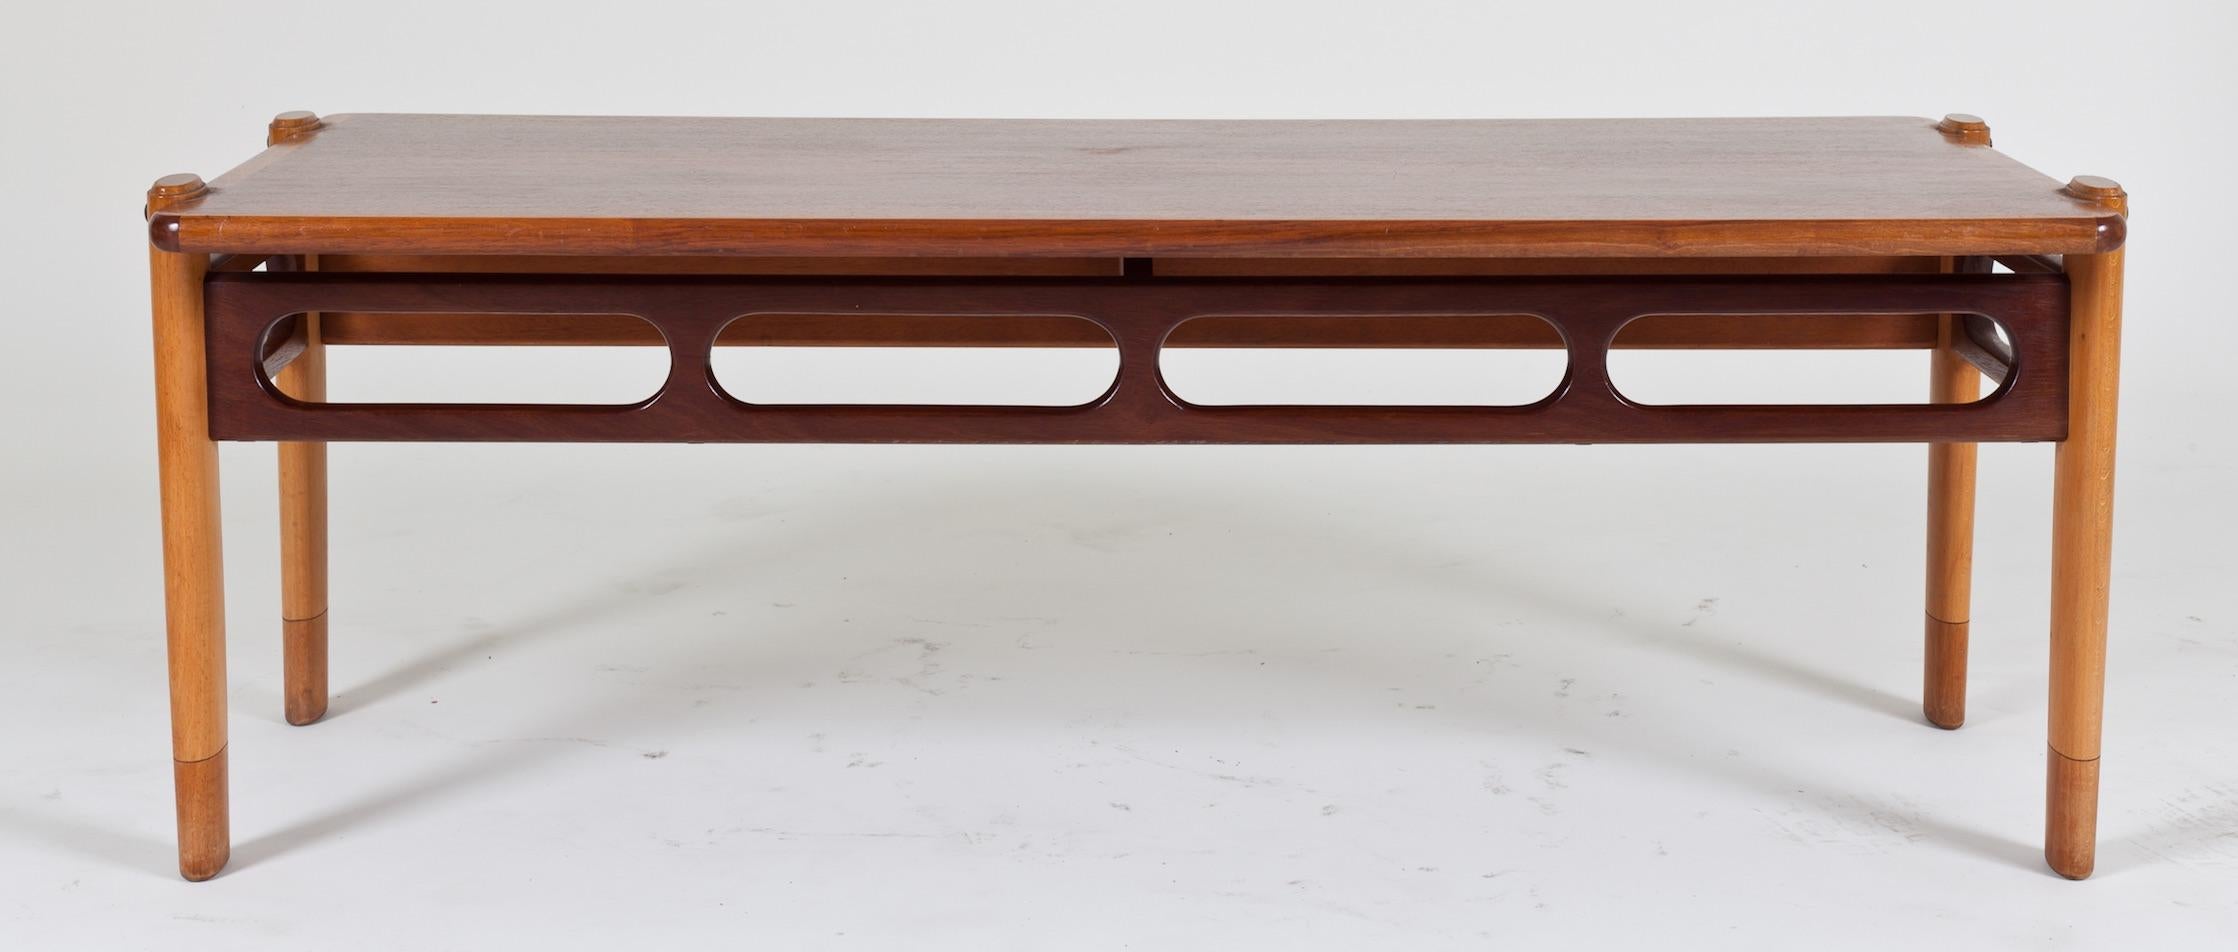 Danish teak and rosewood coffee table, 1960s. Small scale with carved oval details.
  